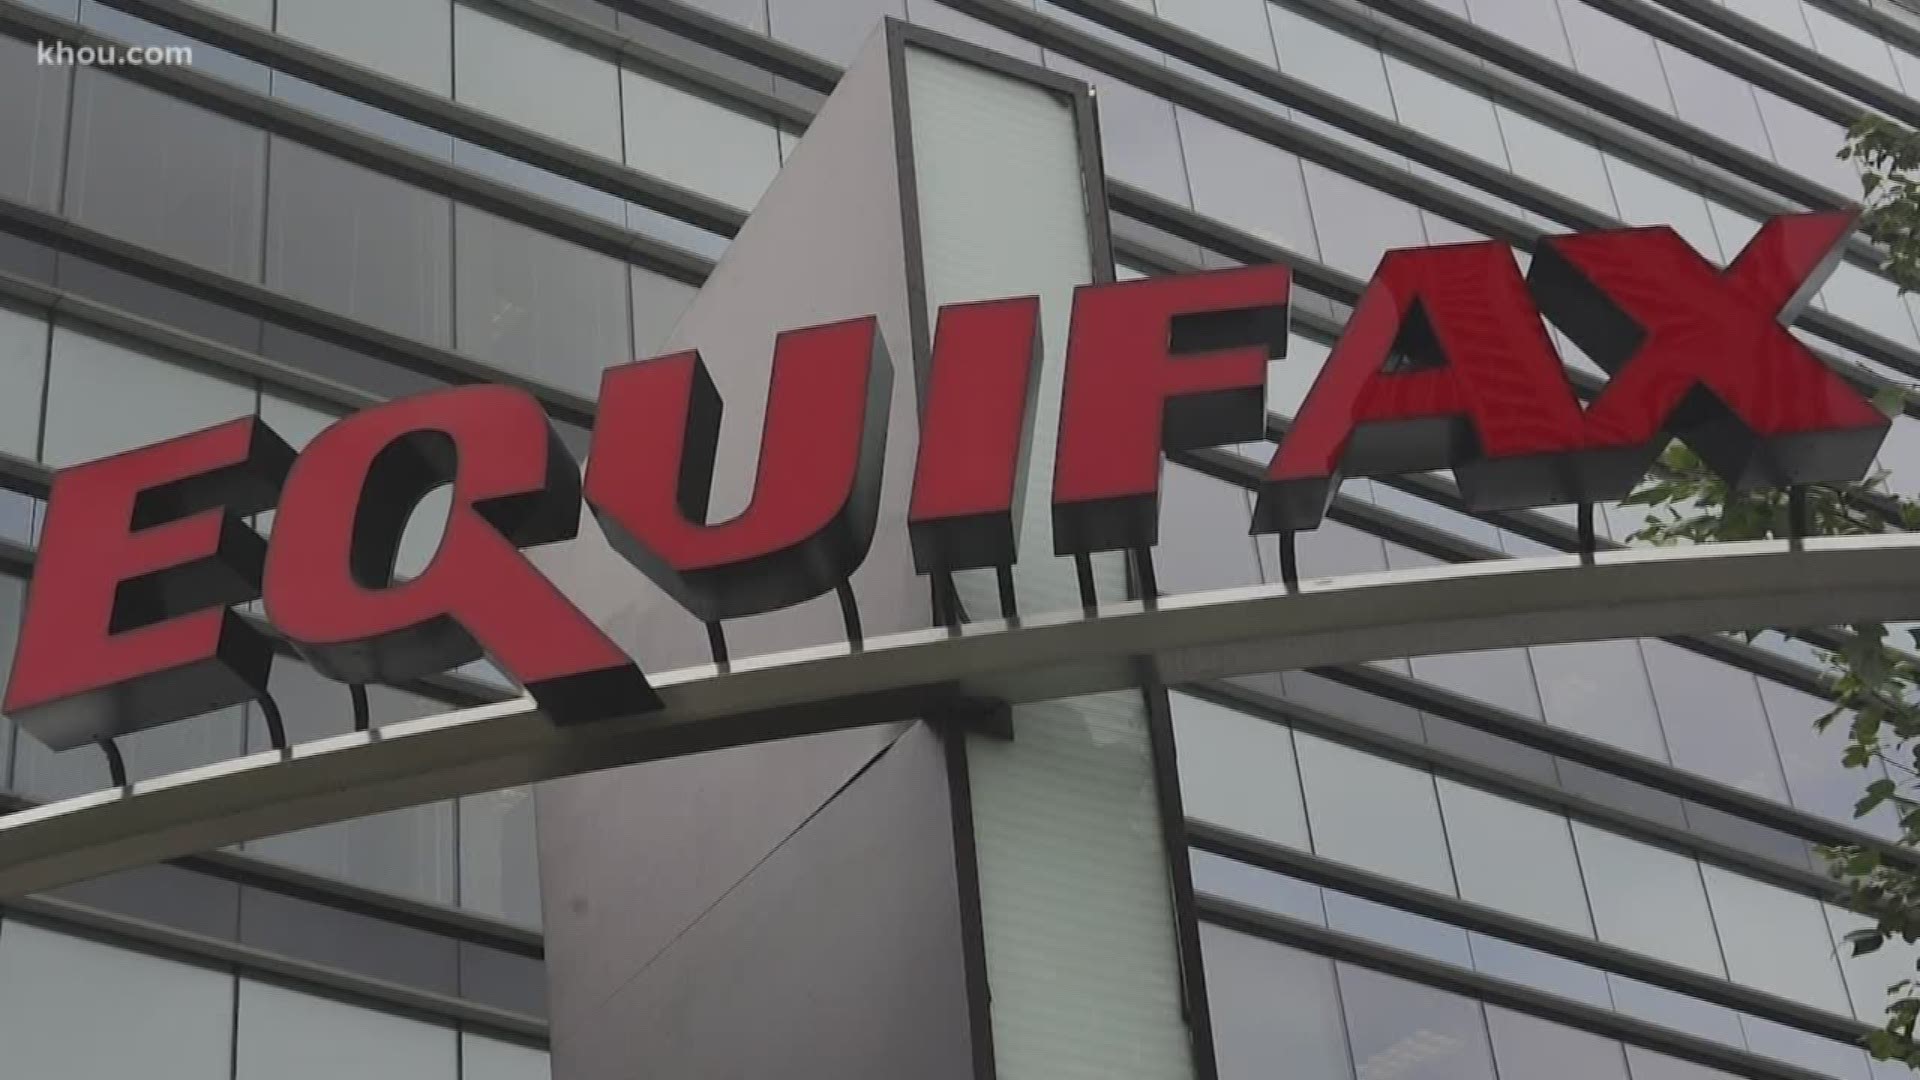 So many of you are sending in questions about the Equifax data breach settlement. There's cash to claim, but you've got to share some personal info online to get it.